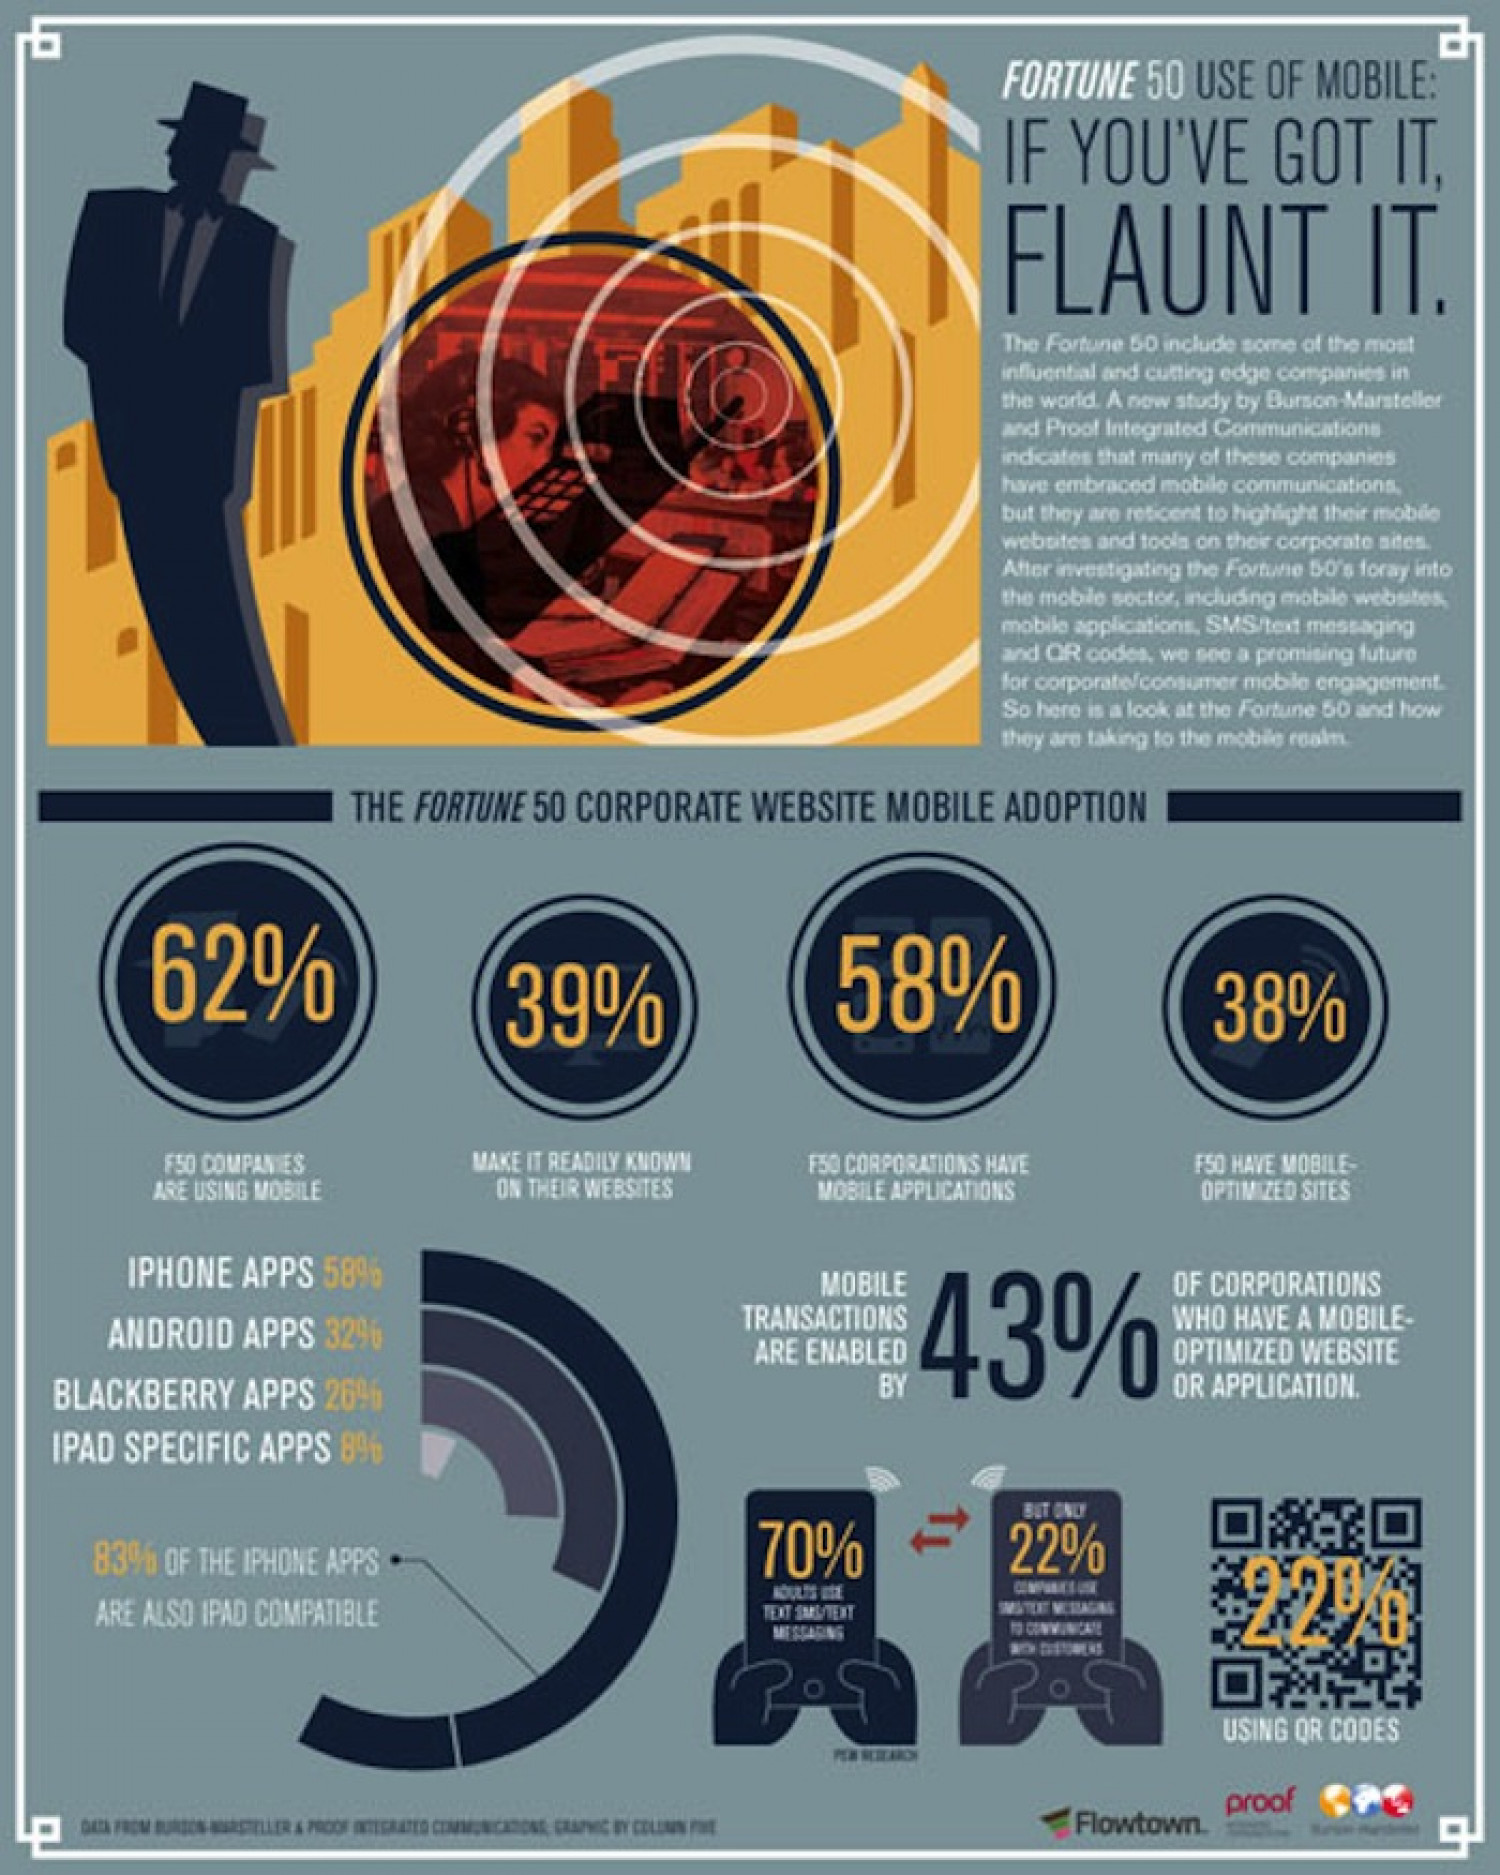 If You've Got It, Flaunt It Infographic